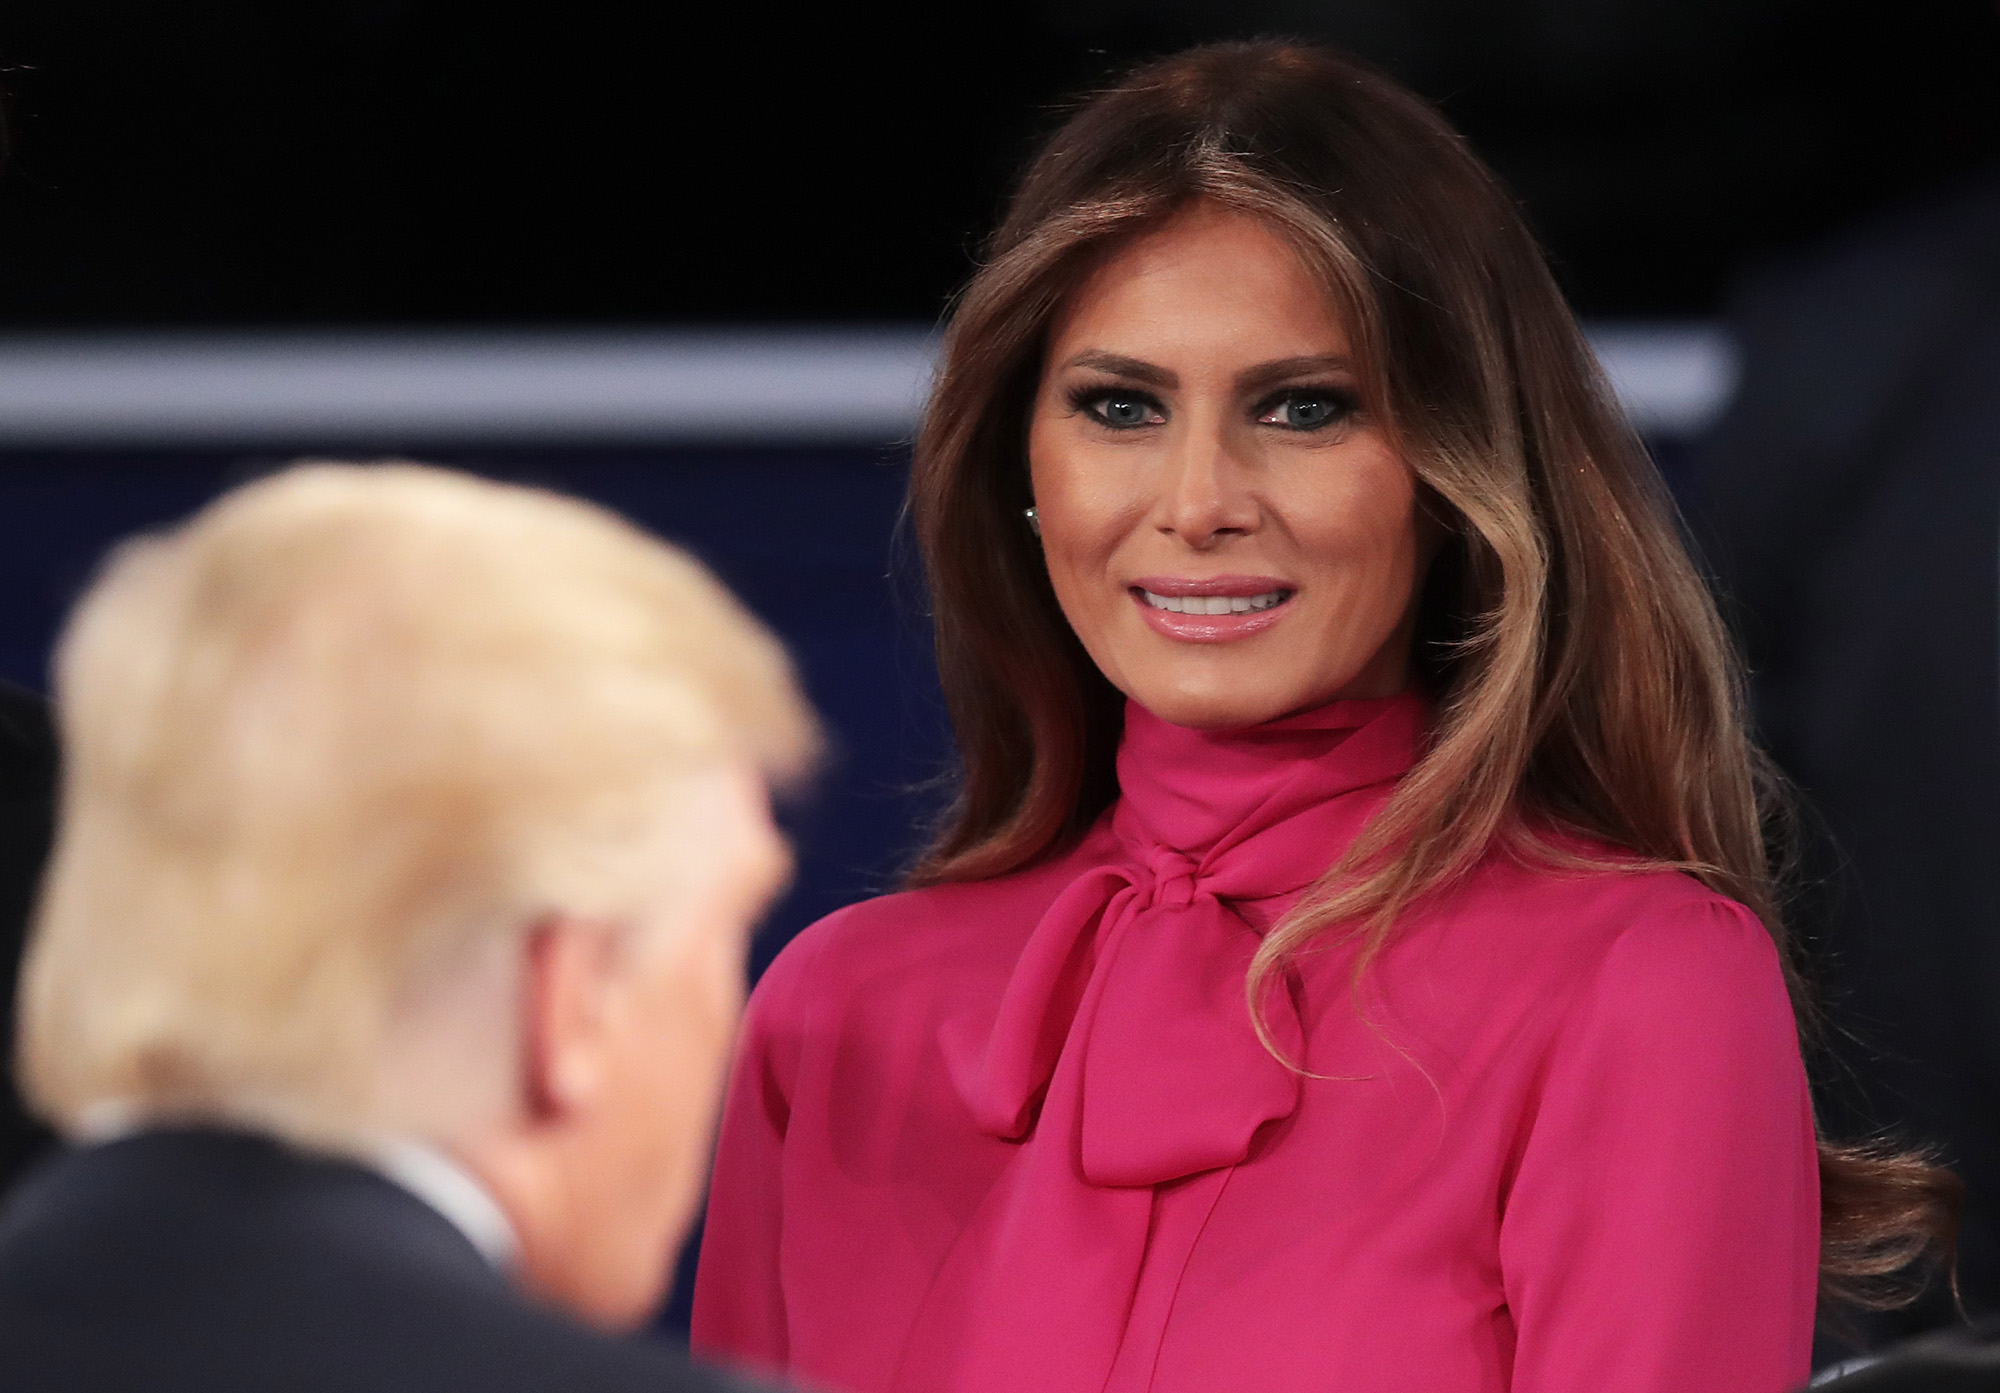 Melania Trump at second presidential debate at Washington University on October 9, 2016 in St Louis, Missouri. (Photo by Scott Olson/Getty Images) (Scott Olson&mdash;Getty Images)